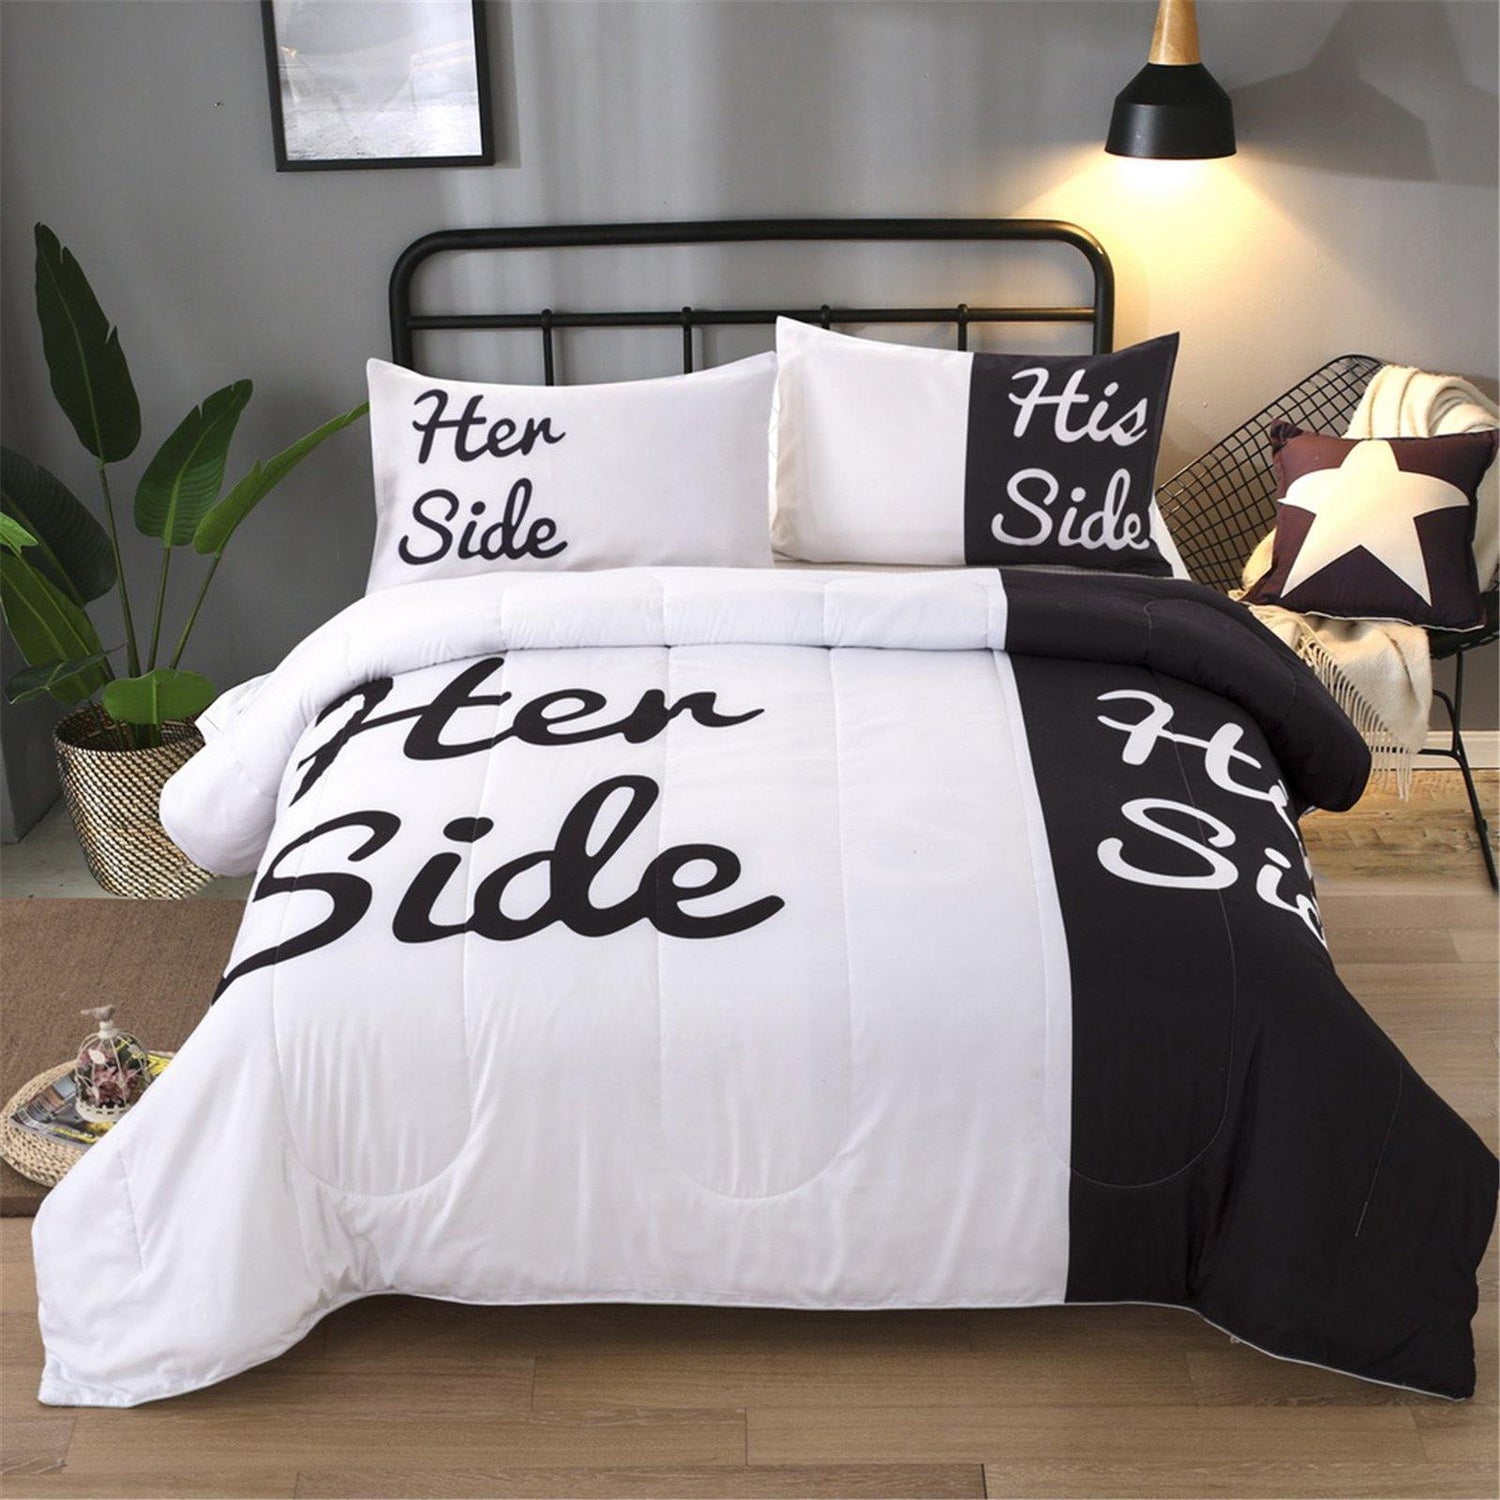 WONGS BEDDING Black and white letters comforter set bedroom bedding 3 Pieces Bedding Comforter with 2 Pillow Cases suitable for the whole season - Wongs bedding